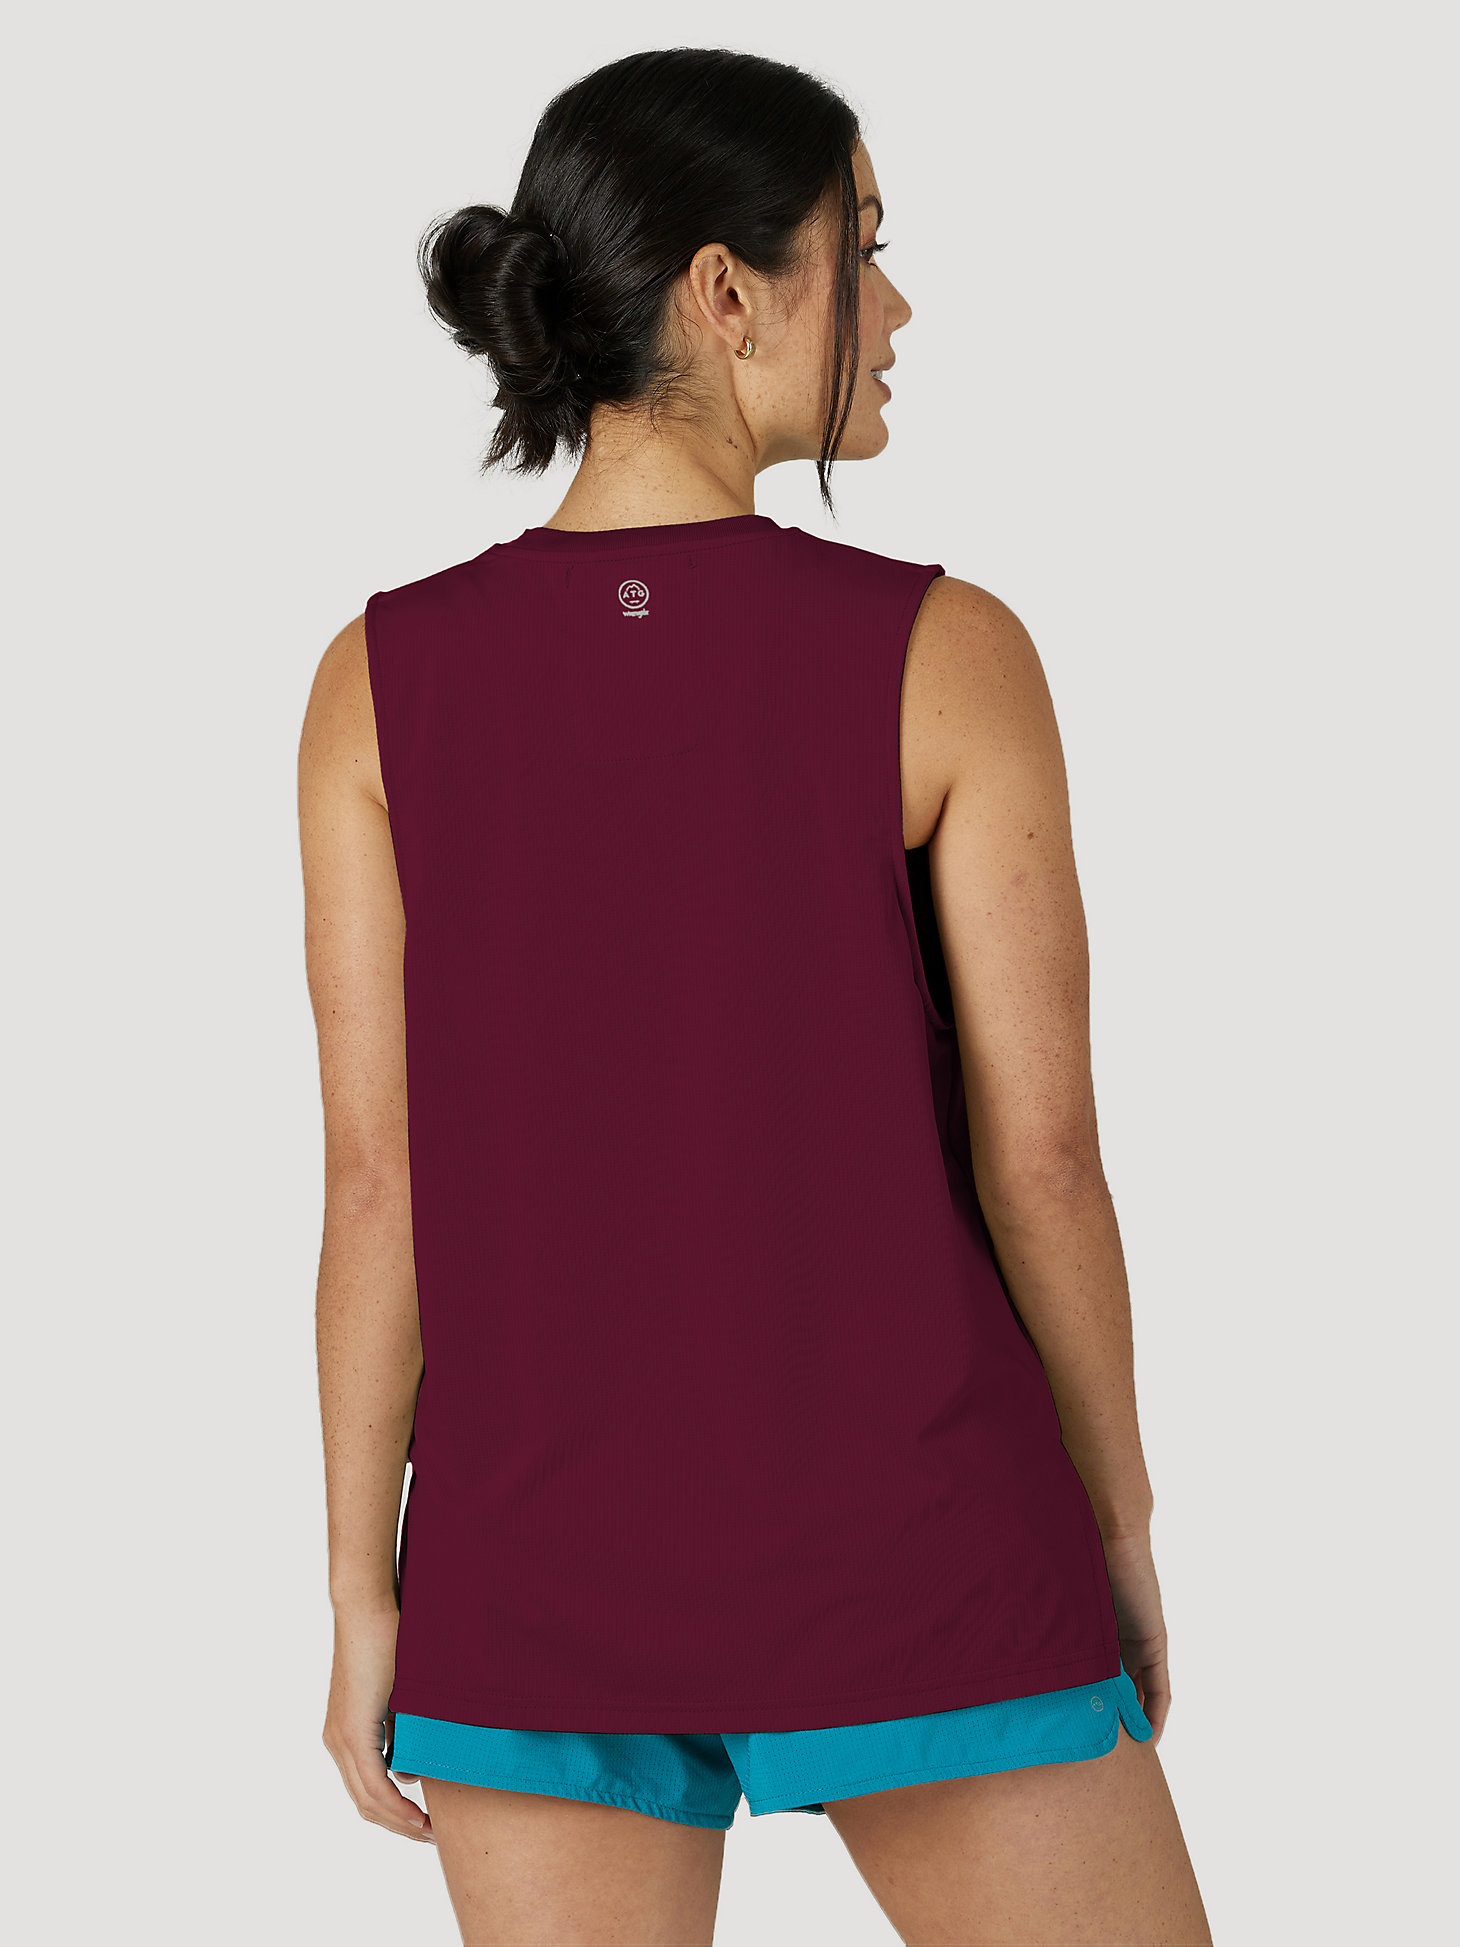 ATG By Wrangler™ Women's Relaxed Fit Tank in Fig alternative view 2